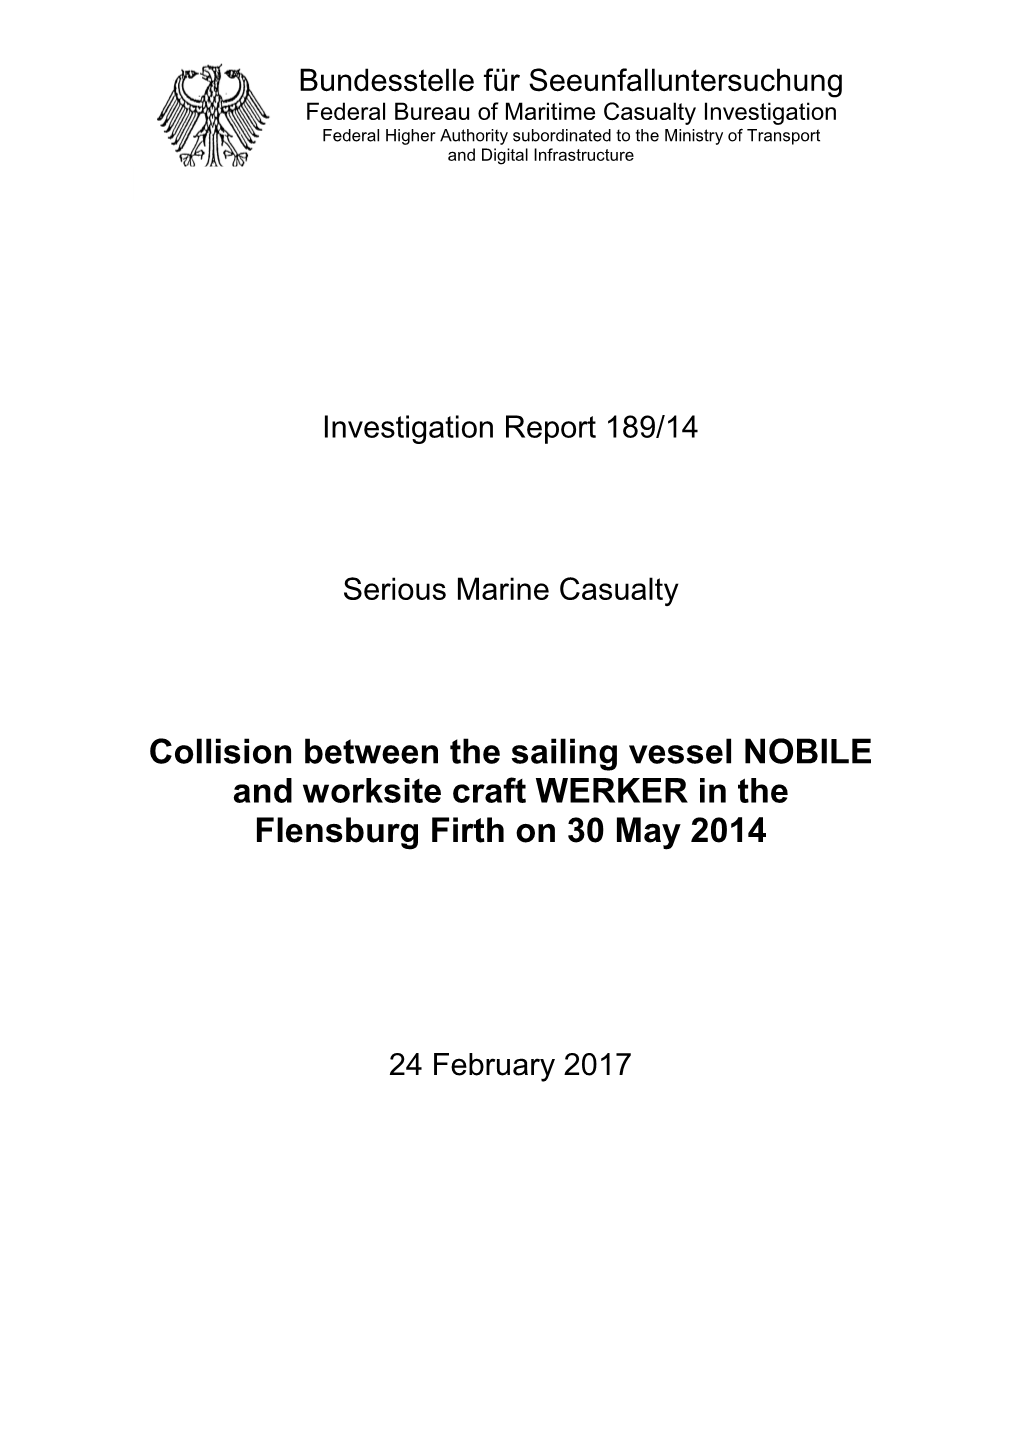 Collision Between the Sailing Vessel NOBILE and Worksite Craft WERKER in the Flensburg Firth on 30 May 2014